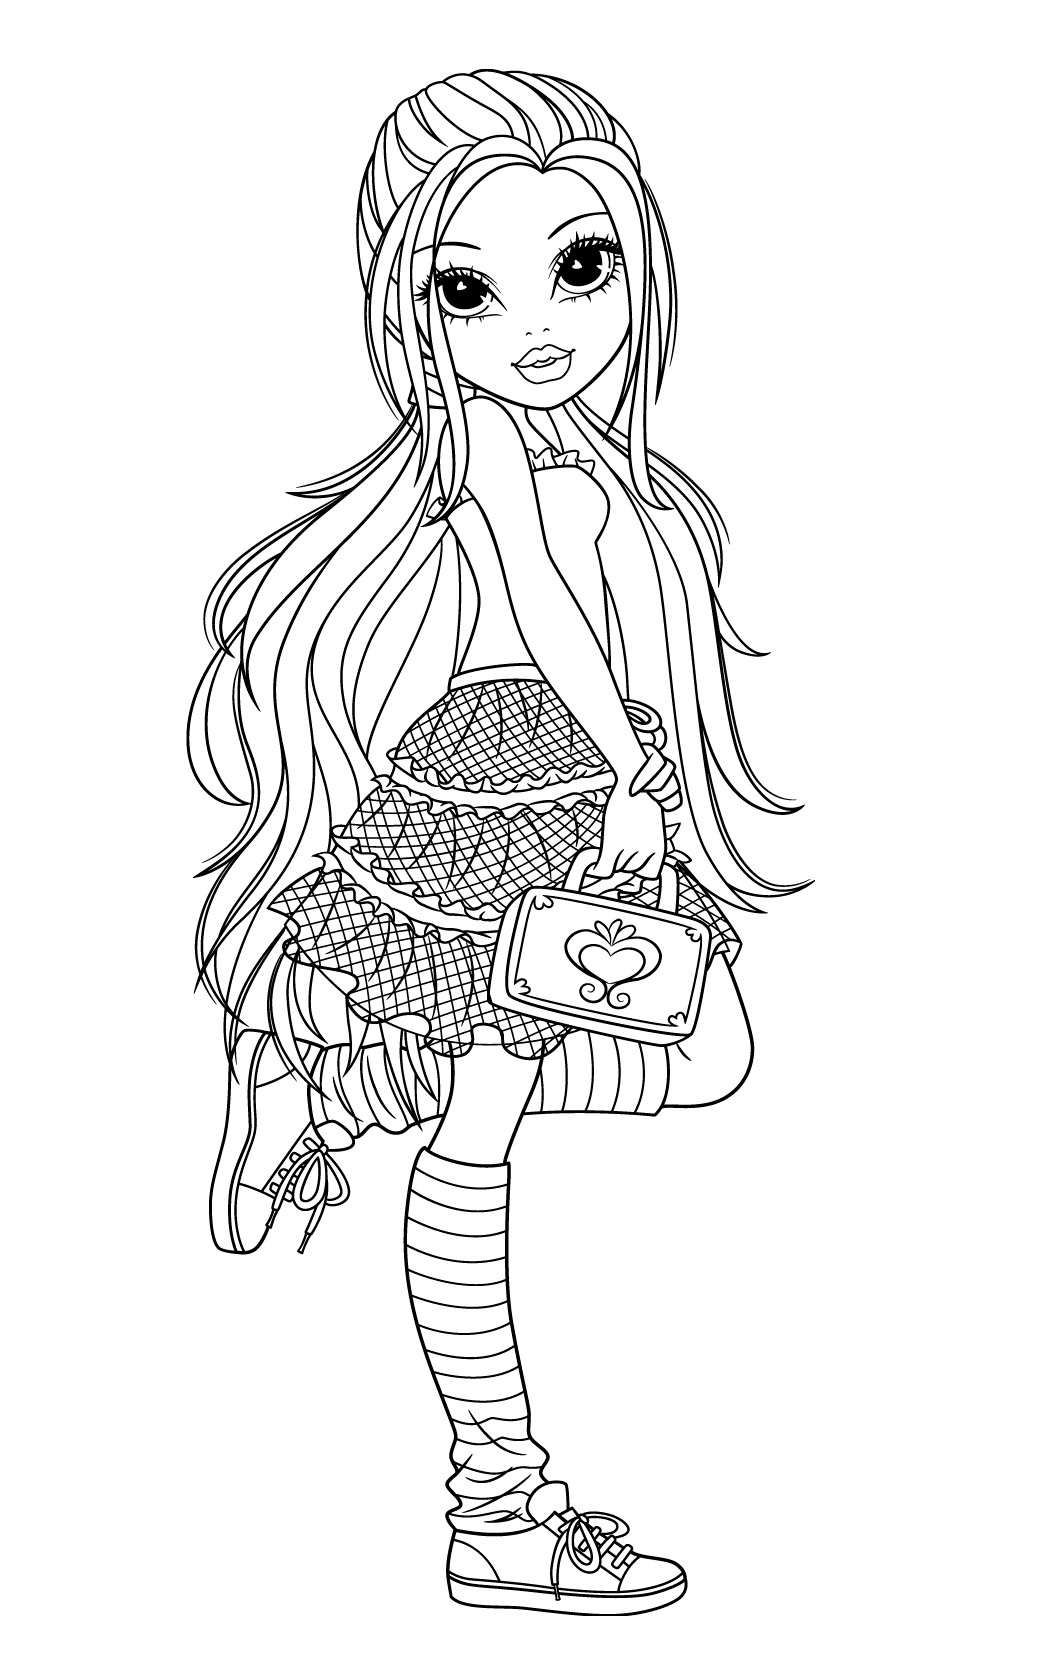 Free Coloring Pages Of Girls
 New Moxie Girlz Coloring Pages will be added frequently so